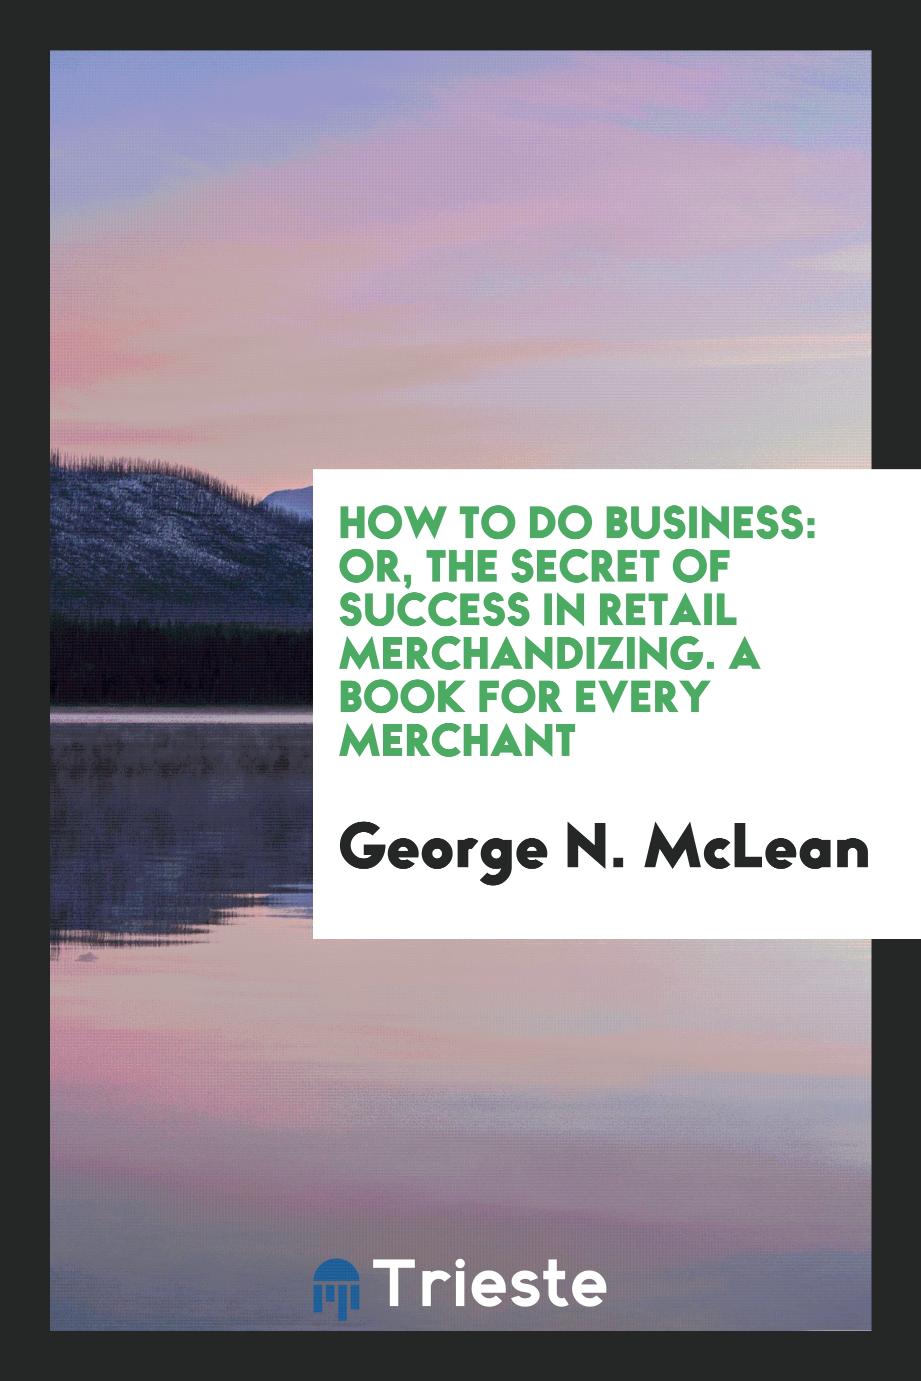 How to Do Business: Or, the Secret of Success in Retail Merchandizing. A Book for Every Merchant